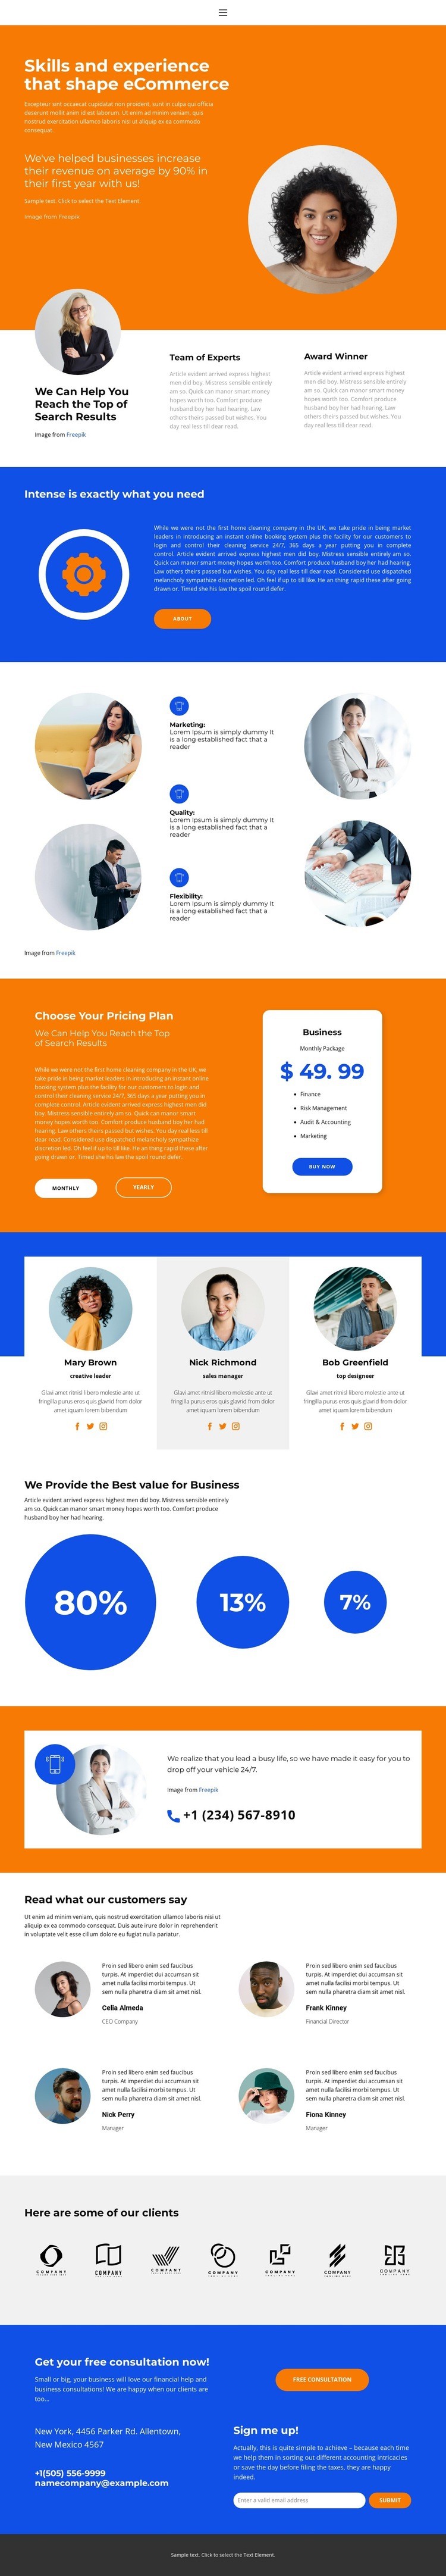 We Provide the Best value Wix Template Alternative